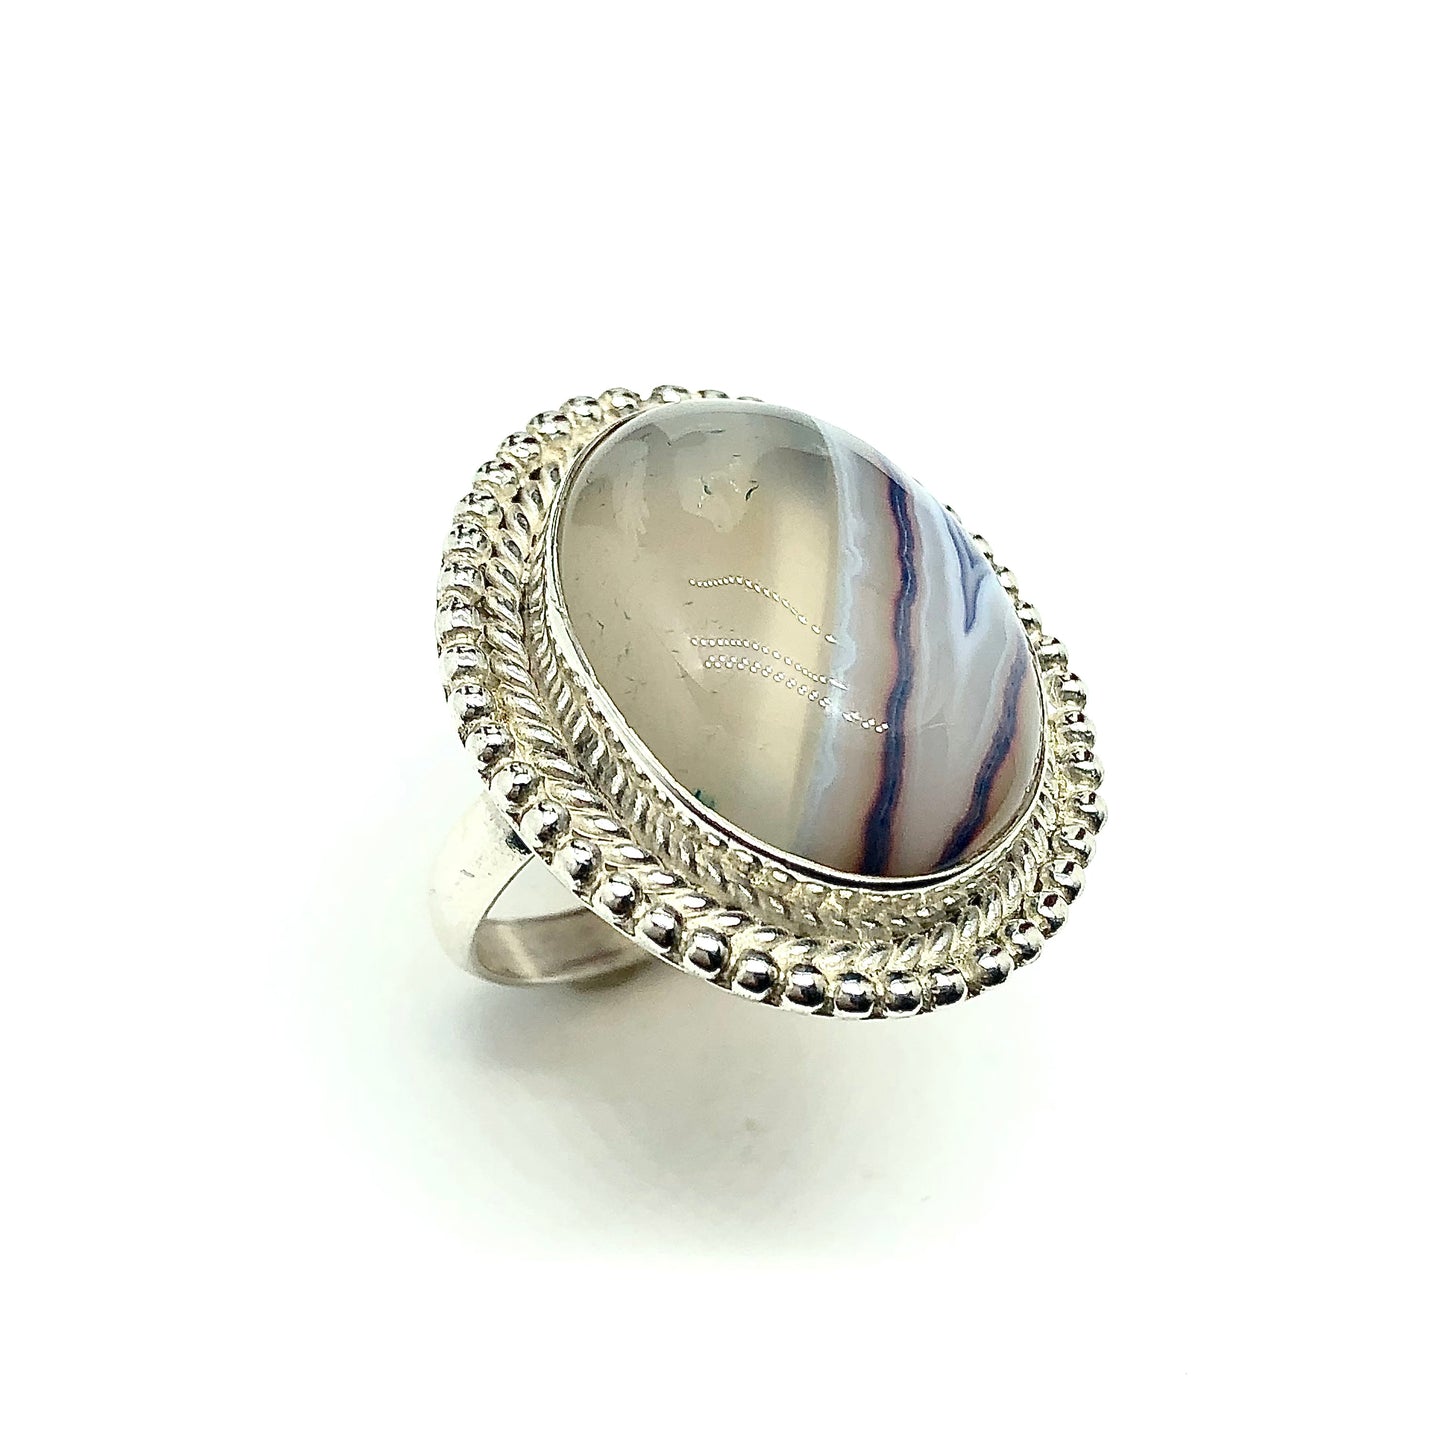 Big Stone Ring, Men's Women's size 9.5 Large Denim Blue Banded Agate Stone Sterling Silver Ring